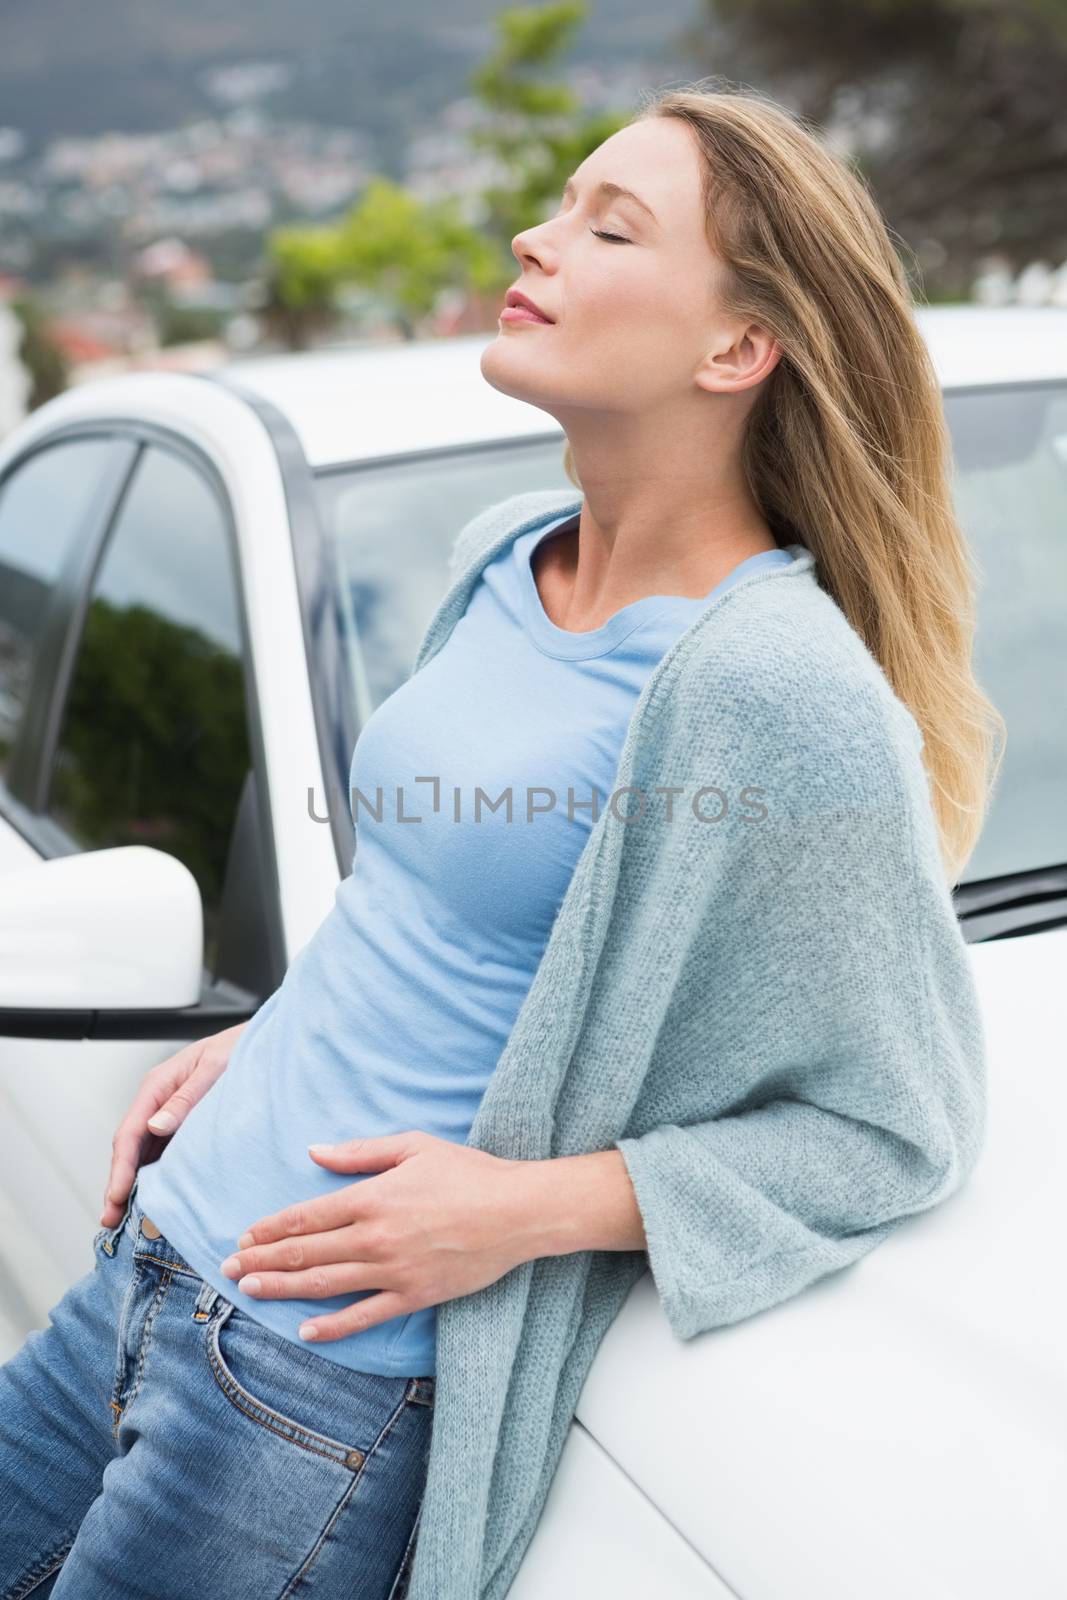 Young woman leaning on her car